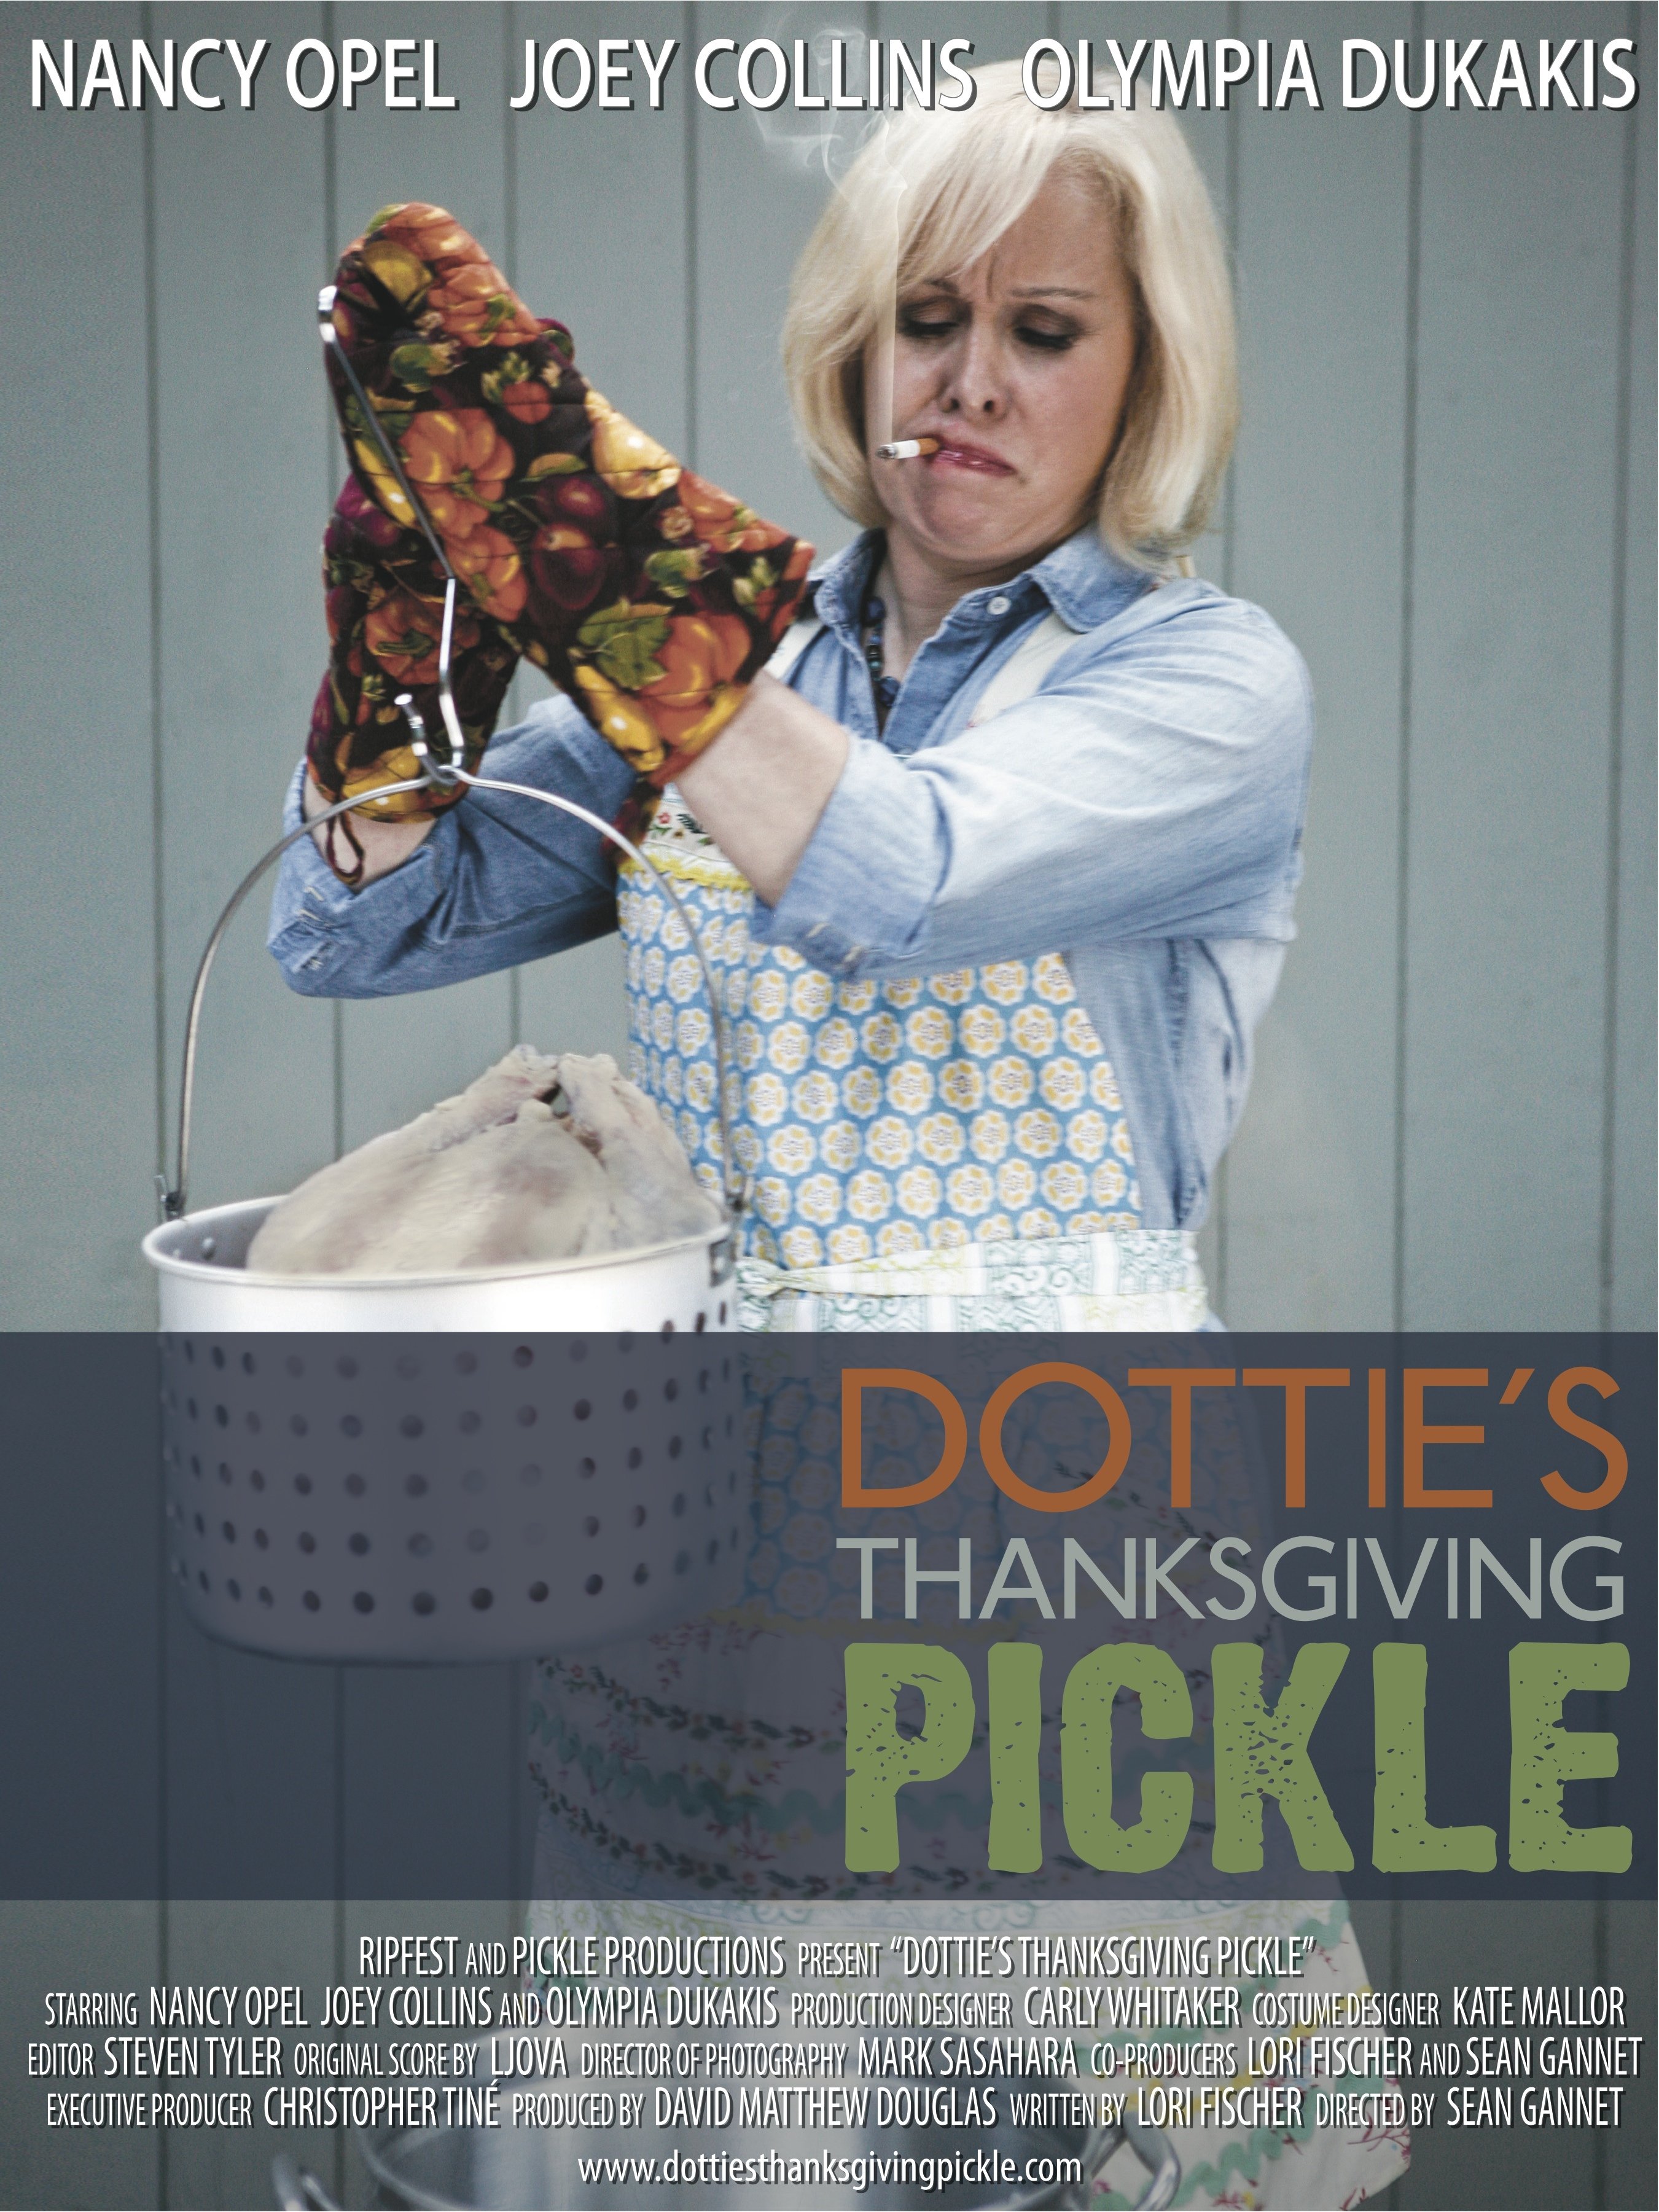 Dottie's Thanksgiving Pickle starring Olympia Dukakis, Nancy Opel, and Joey Collins. Directed by Sean Gannet, Written by Lori Fischer, and Produced by Christopher Tine and David Matthew Douglas